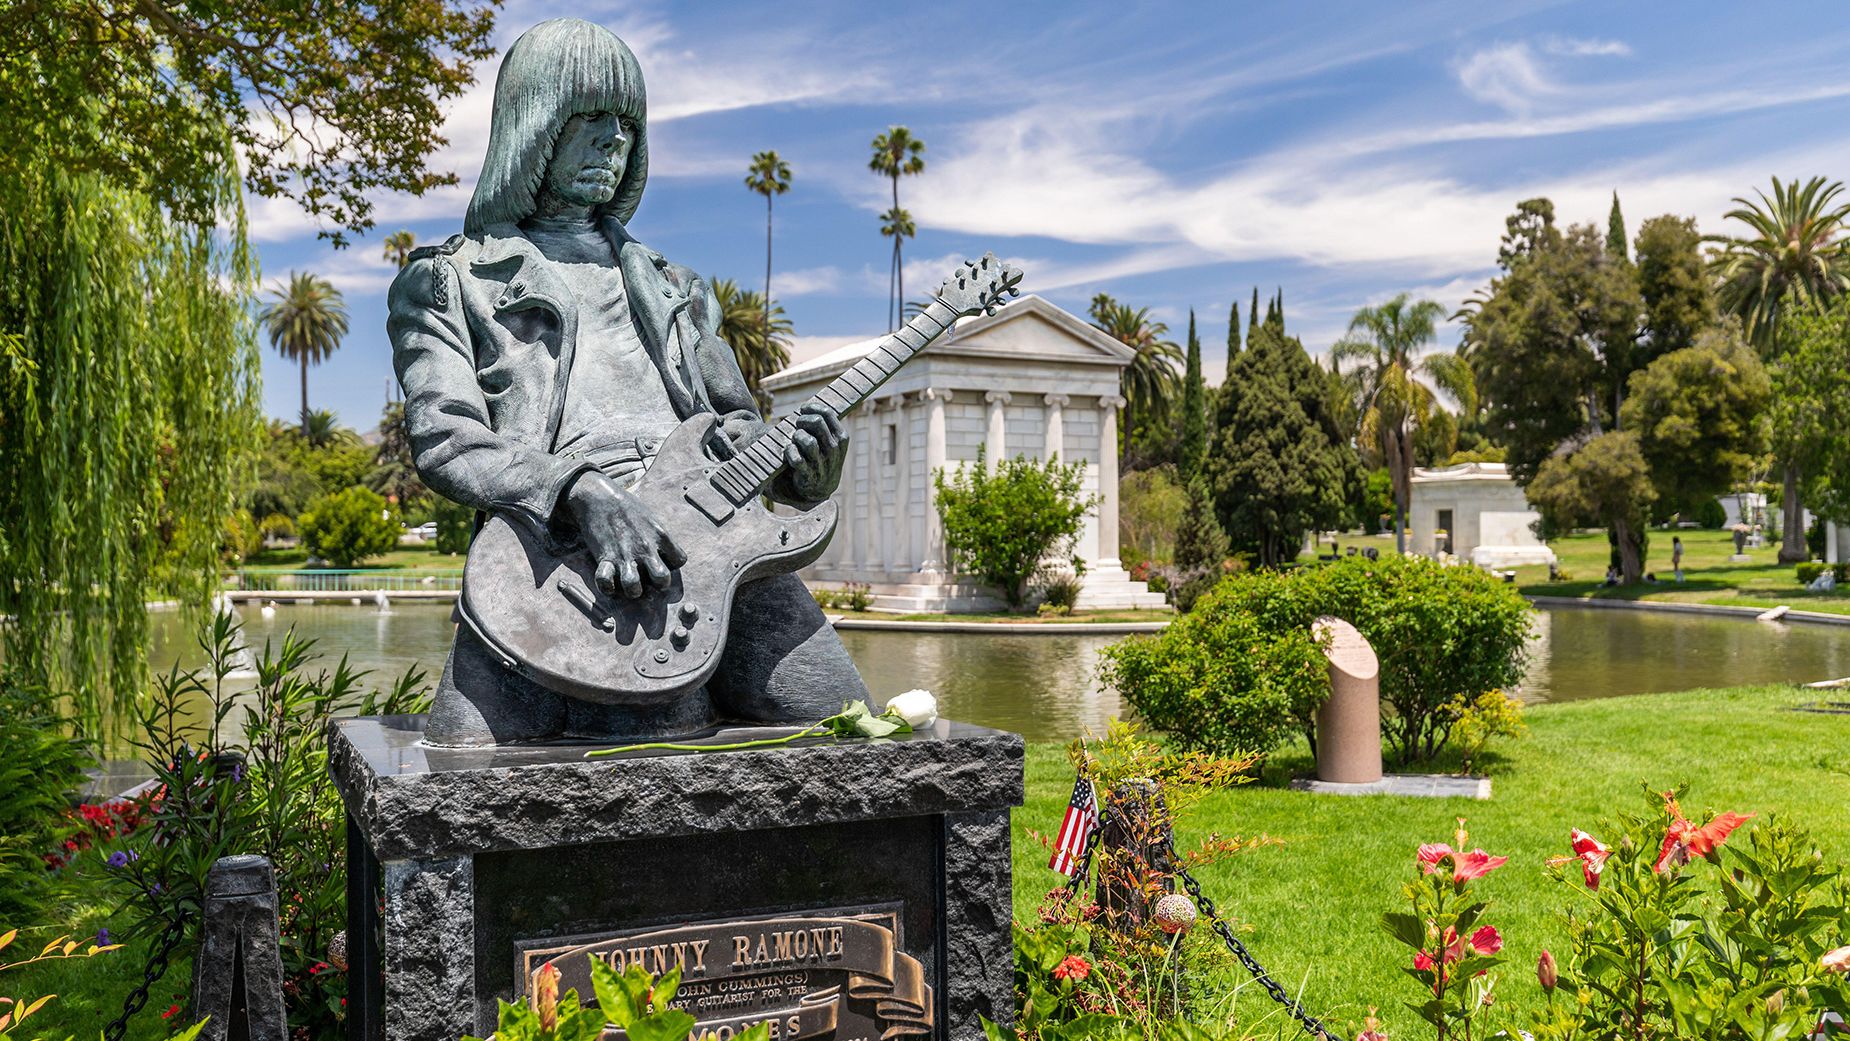 Johnny Ramone's tombstone keeps his memory alive at the Hollywood Forever cemetery in Los Angeles, where dozens of stars are buried.